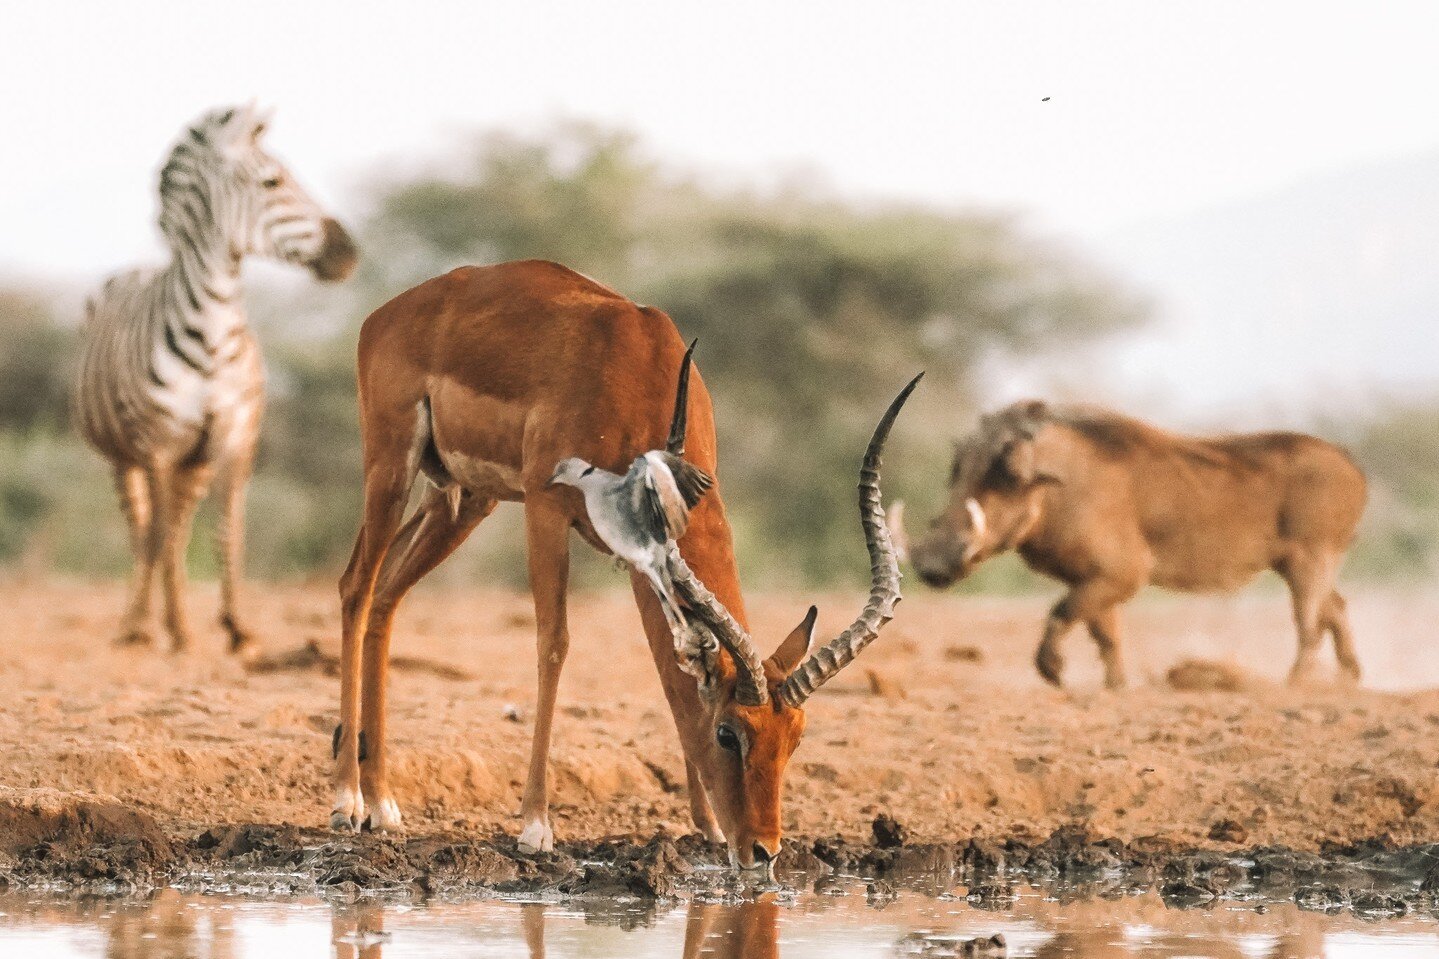 It's all going on around the waterhole. 💦📸⁠
⁠
We had the most magical morning sitting at the Shompole Photography Hide at Shompole Wilderness and had so many different species coming to drink right before us.⁠
⁠
It's one of my new favourite ways to